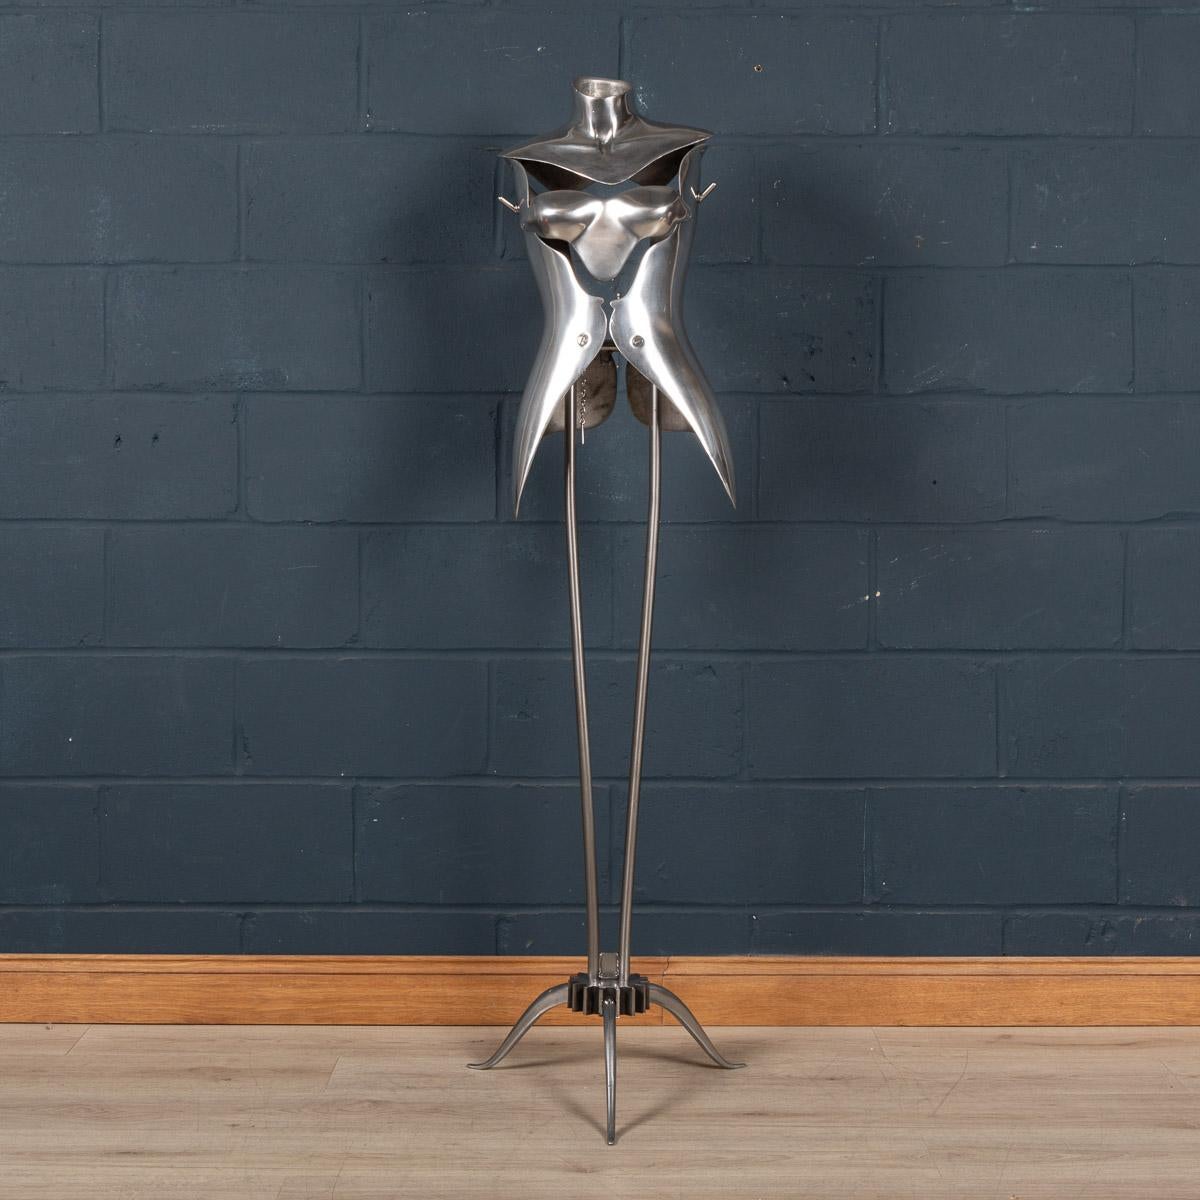 A stylish mannequin designed by Nigel Coates, made for Jigsaw Clothing Company, Knightsbridge, London in the latter part of the 20th century. Made in aluminium with sectional constructed torsos, these are some of the most striking design of